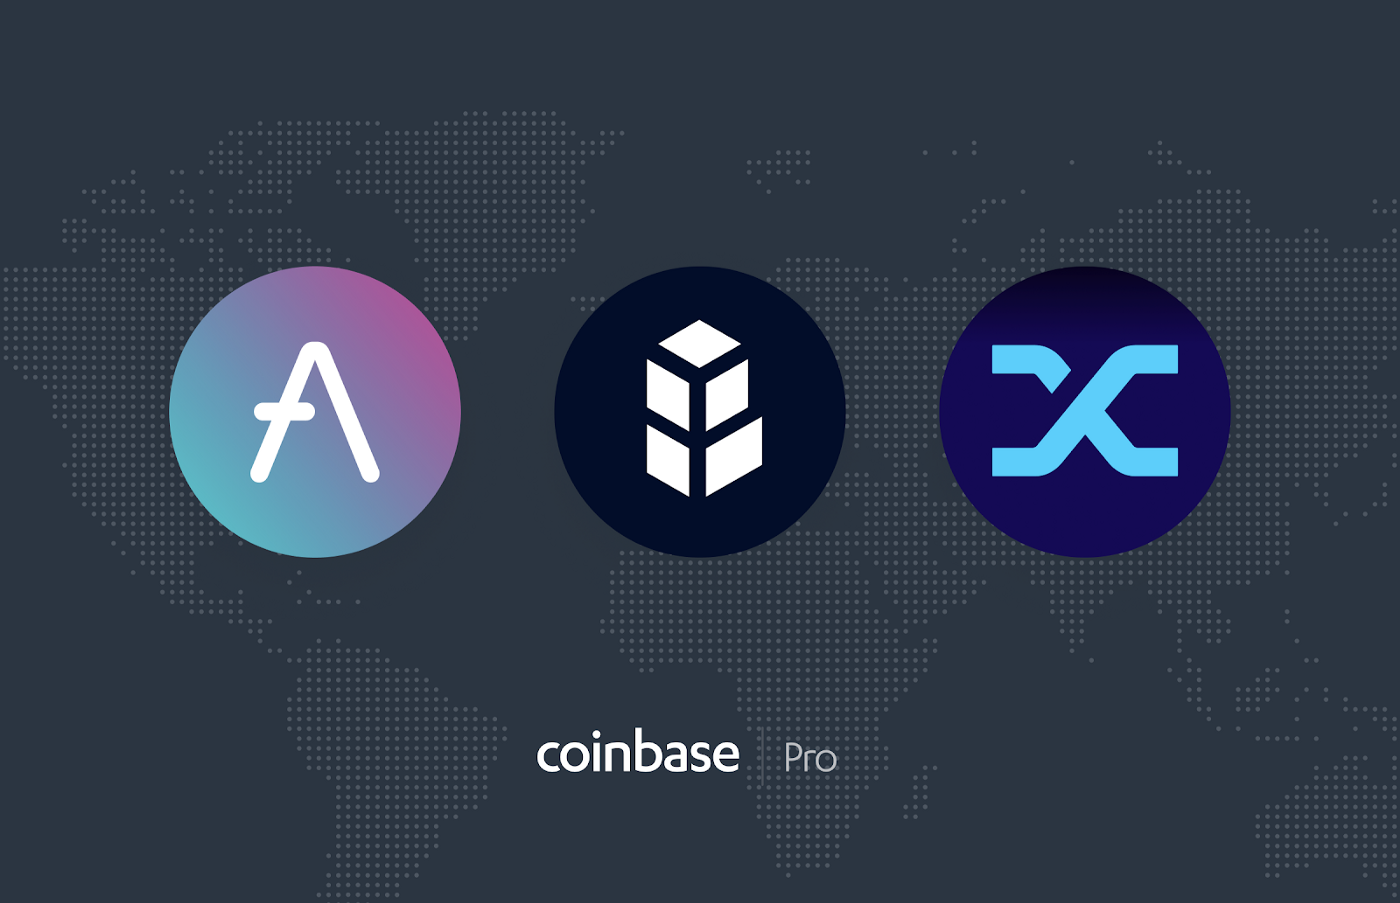 Aave (AAVE), Bancor (BNT) and Synthetix (SNX) are launching on Coinbase Pro